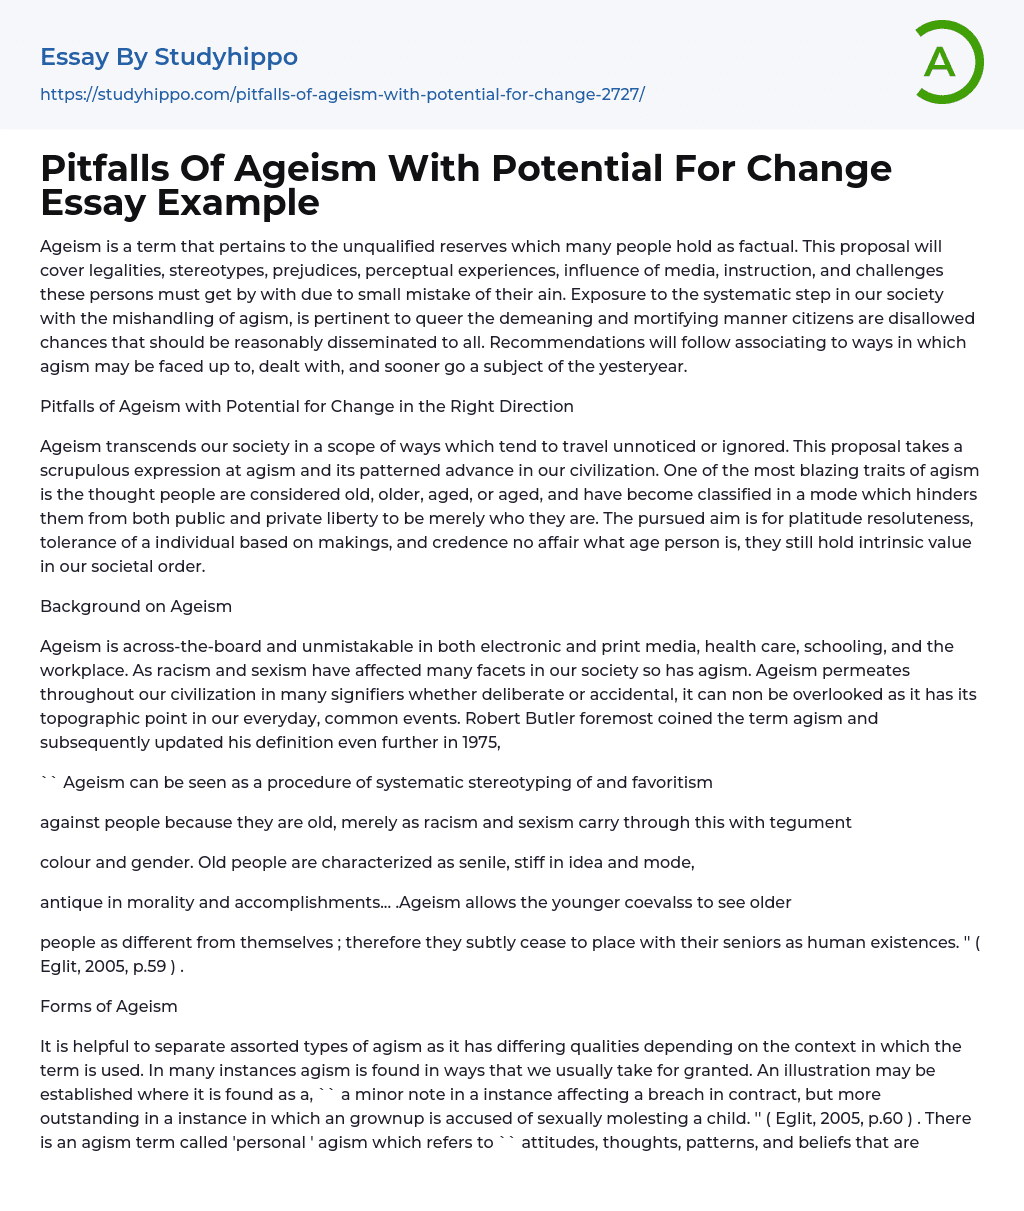 Pitfalls Of Ageism With Potential For Change Essay Example